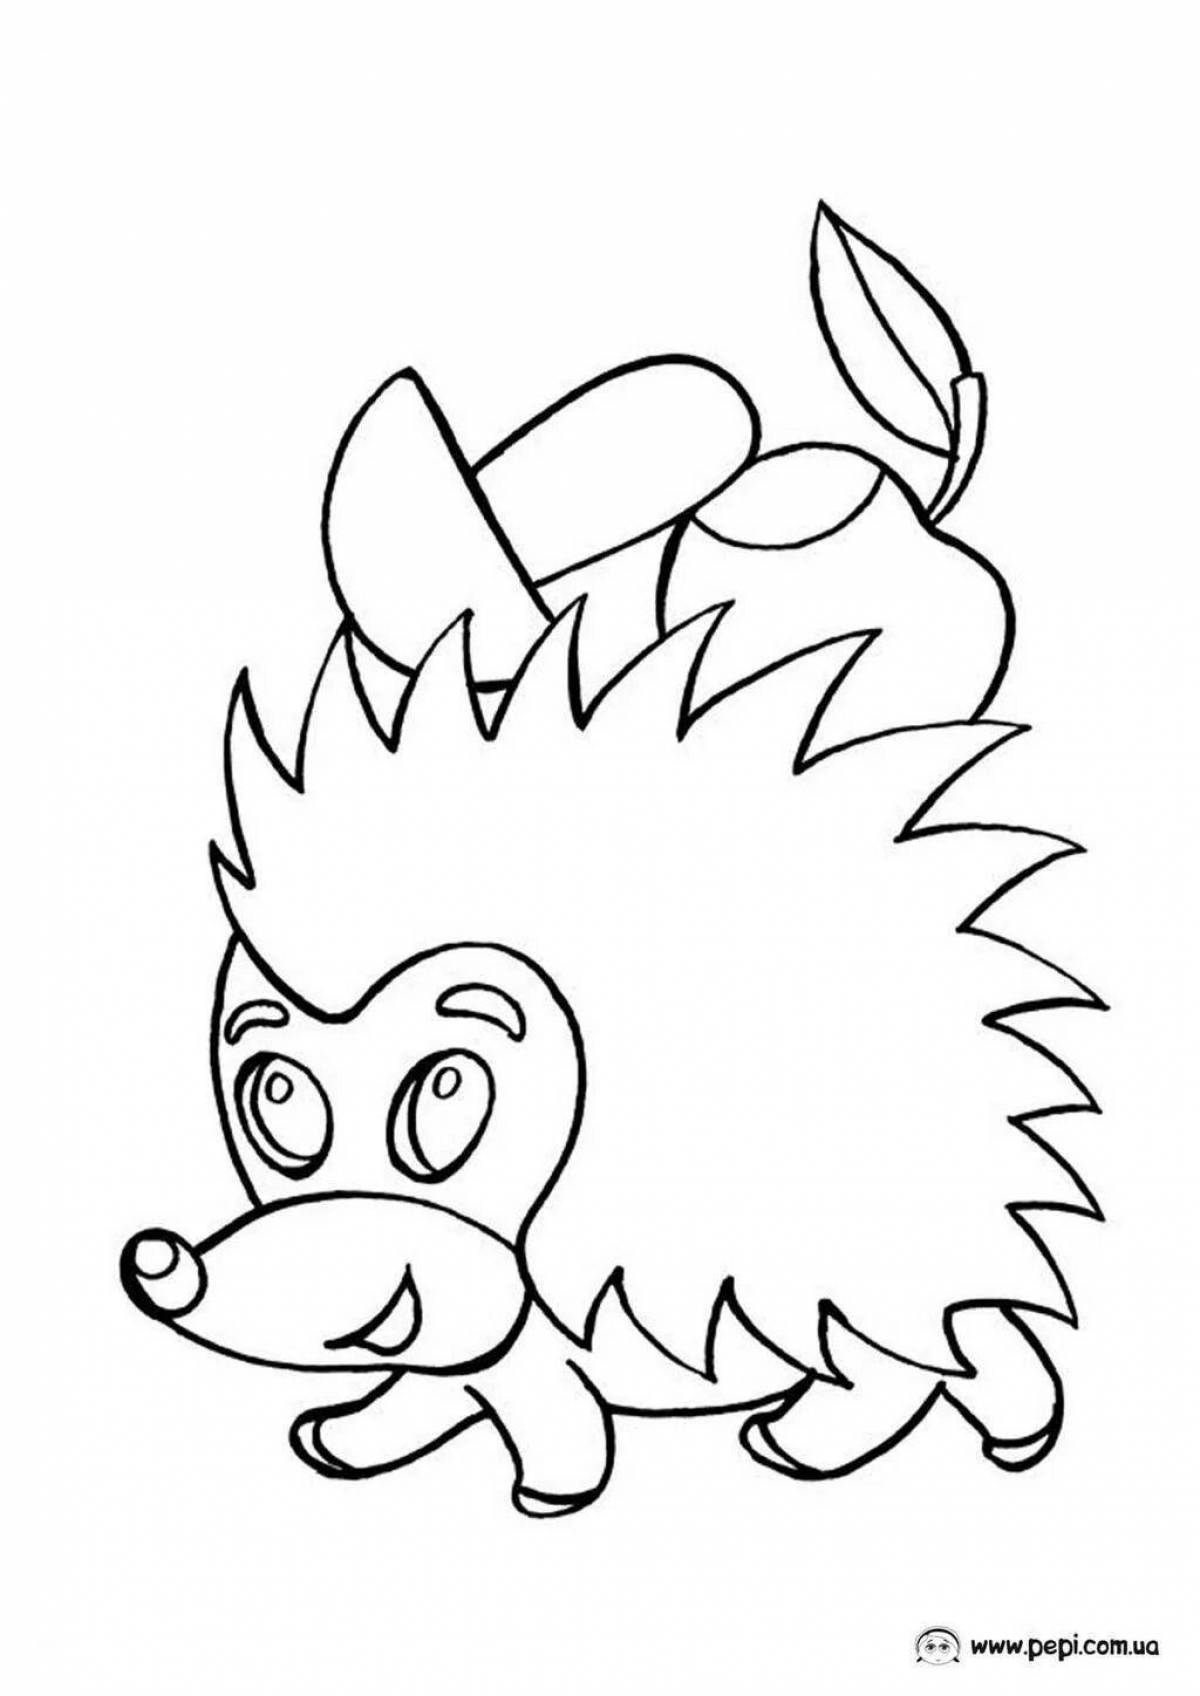 Fancy coloring hedgehog for children 3-4 years old